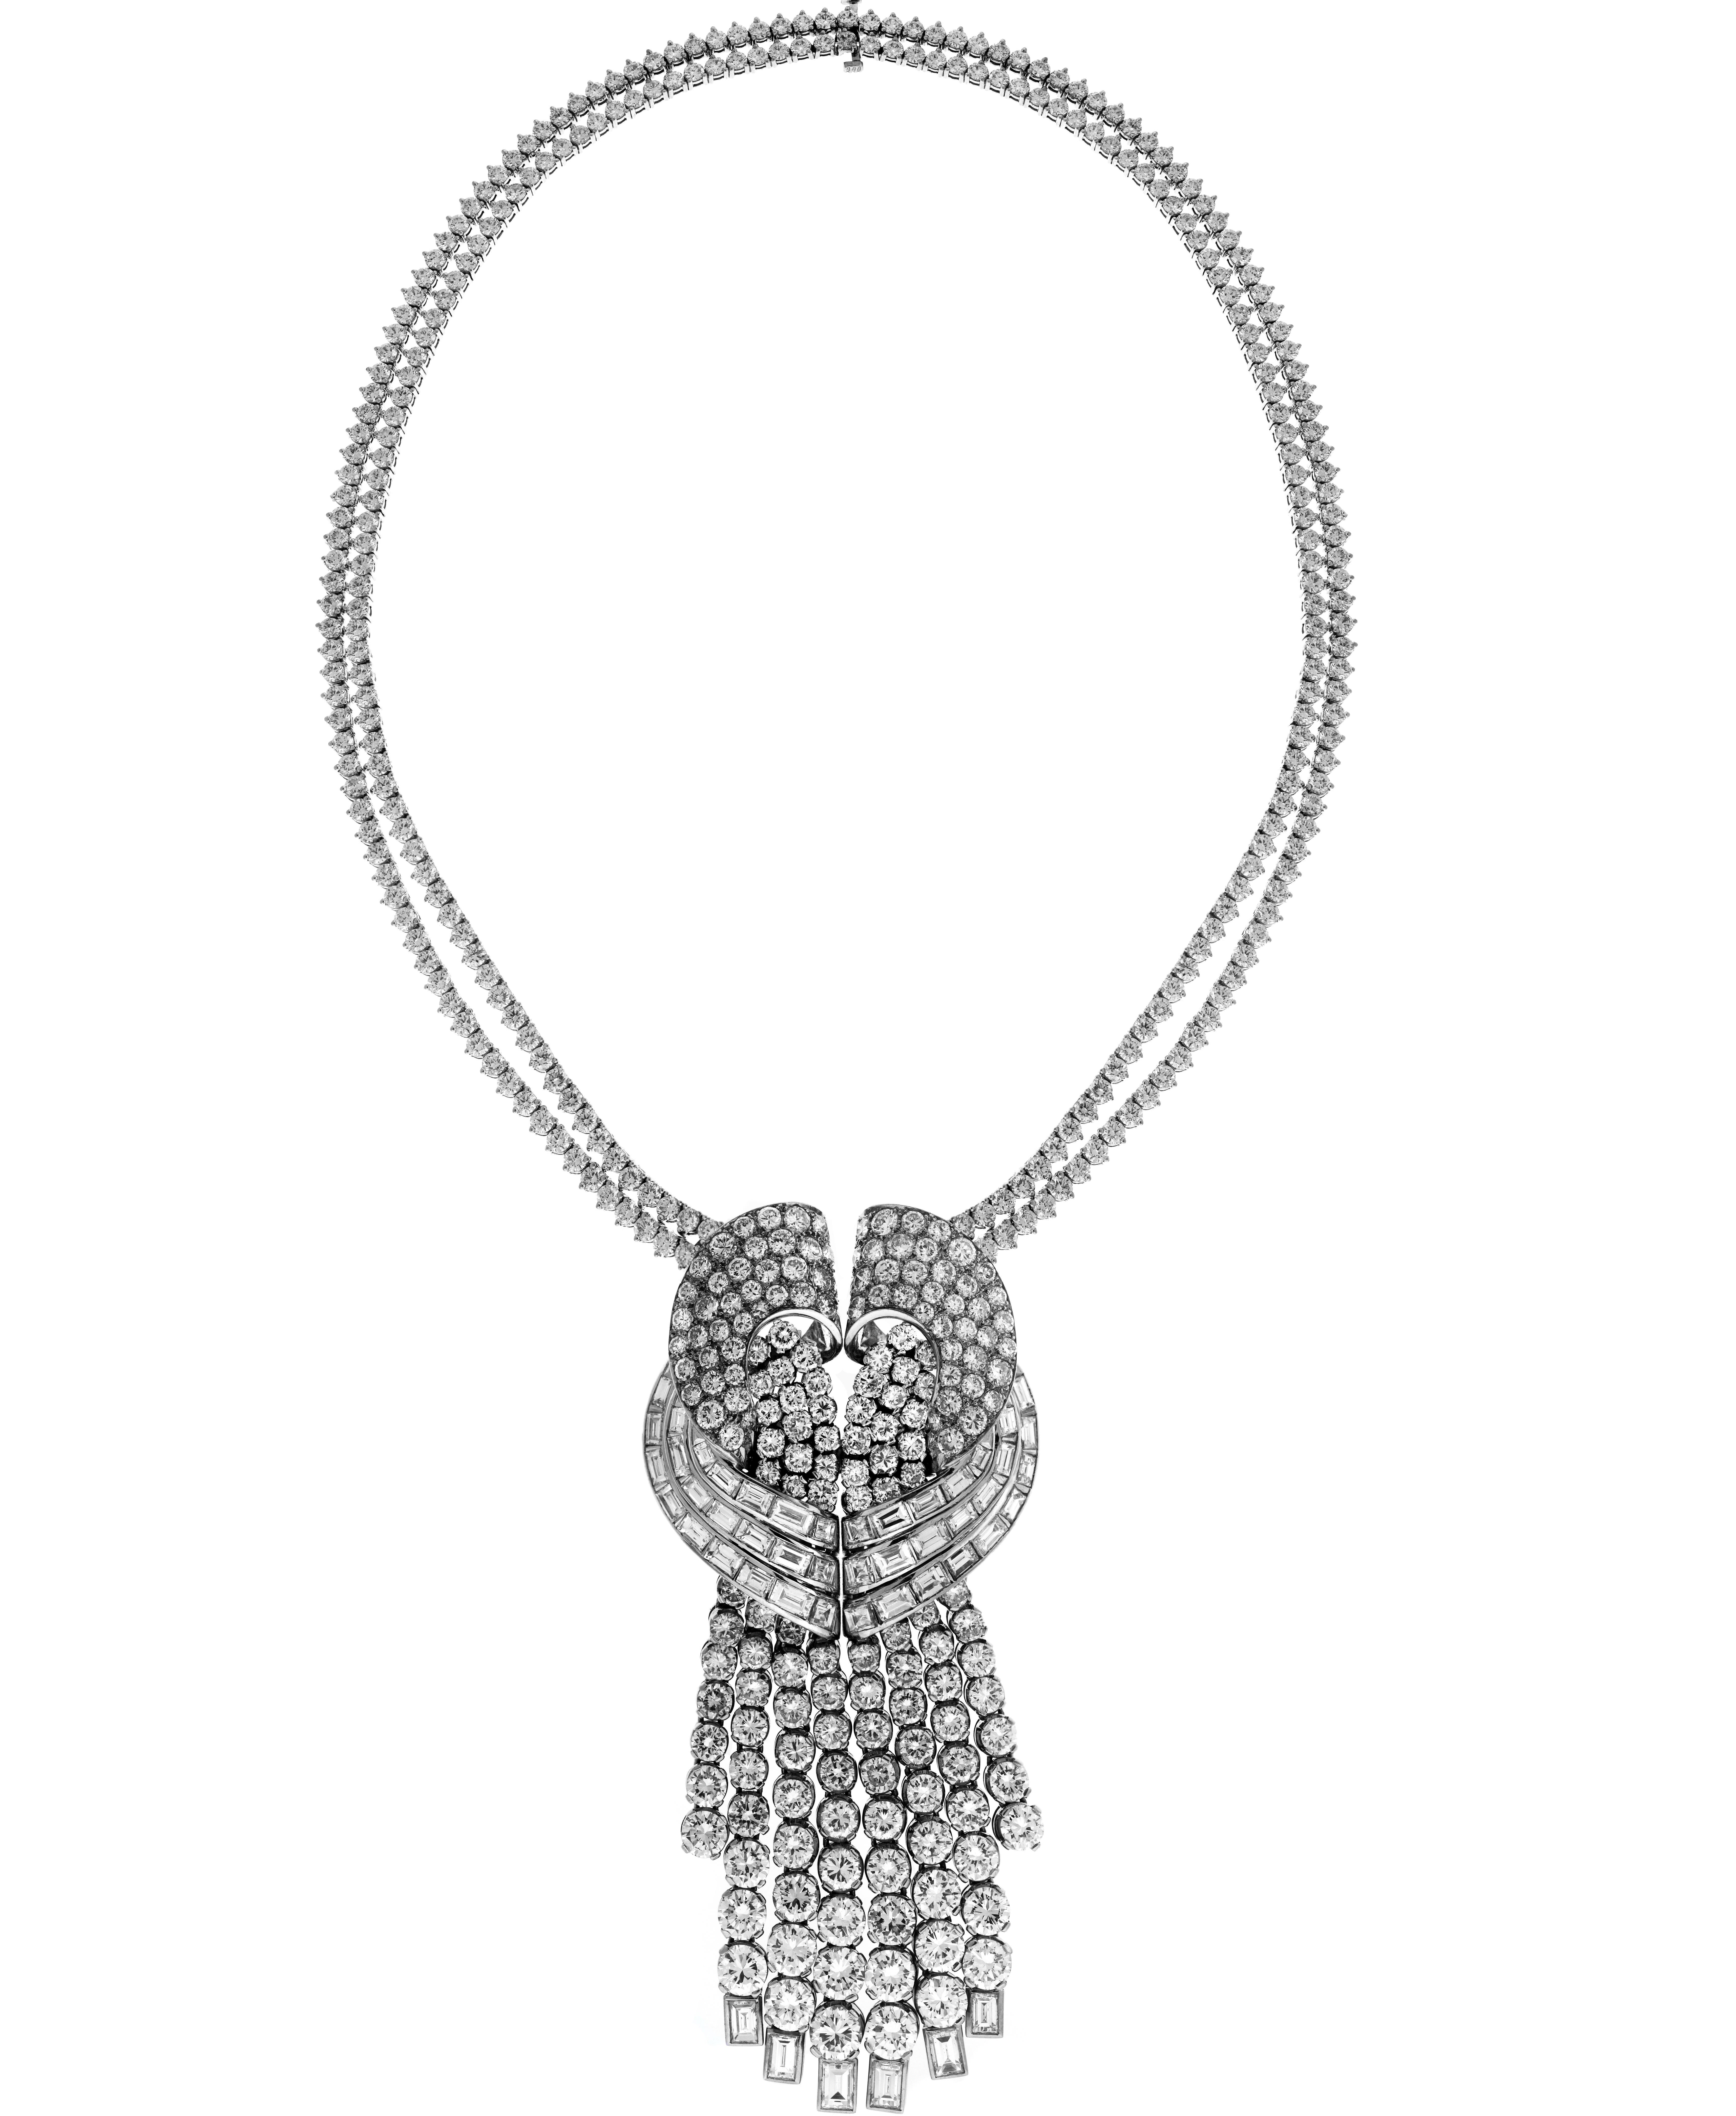 Platinum Large Dangling Baguette Round Diamond Pendant Double Tennis Necklace

Round and Straight Baguette Diamonds are set all throughout the pendant. Pendant is attached to two tennis necklaces.

Total weight of diamonds: Apprx. 53.81 carat all